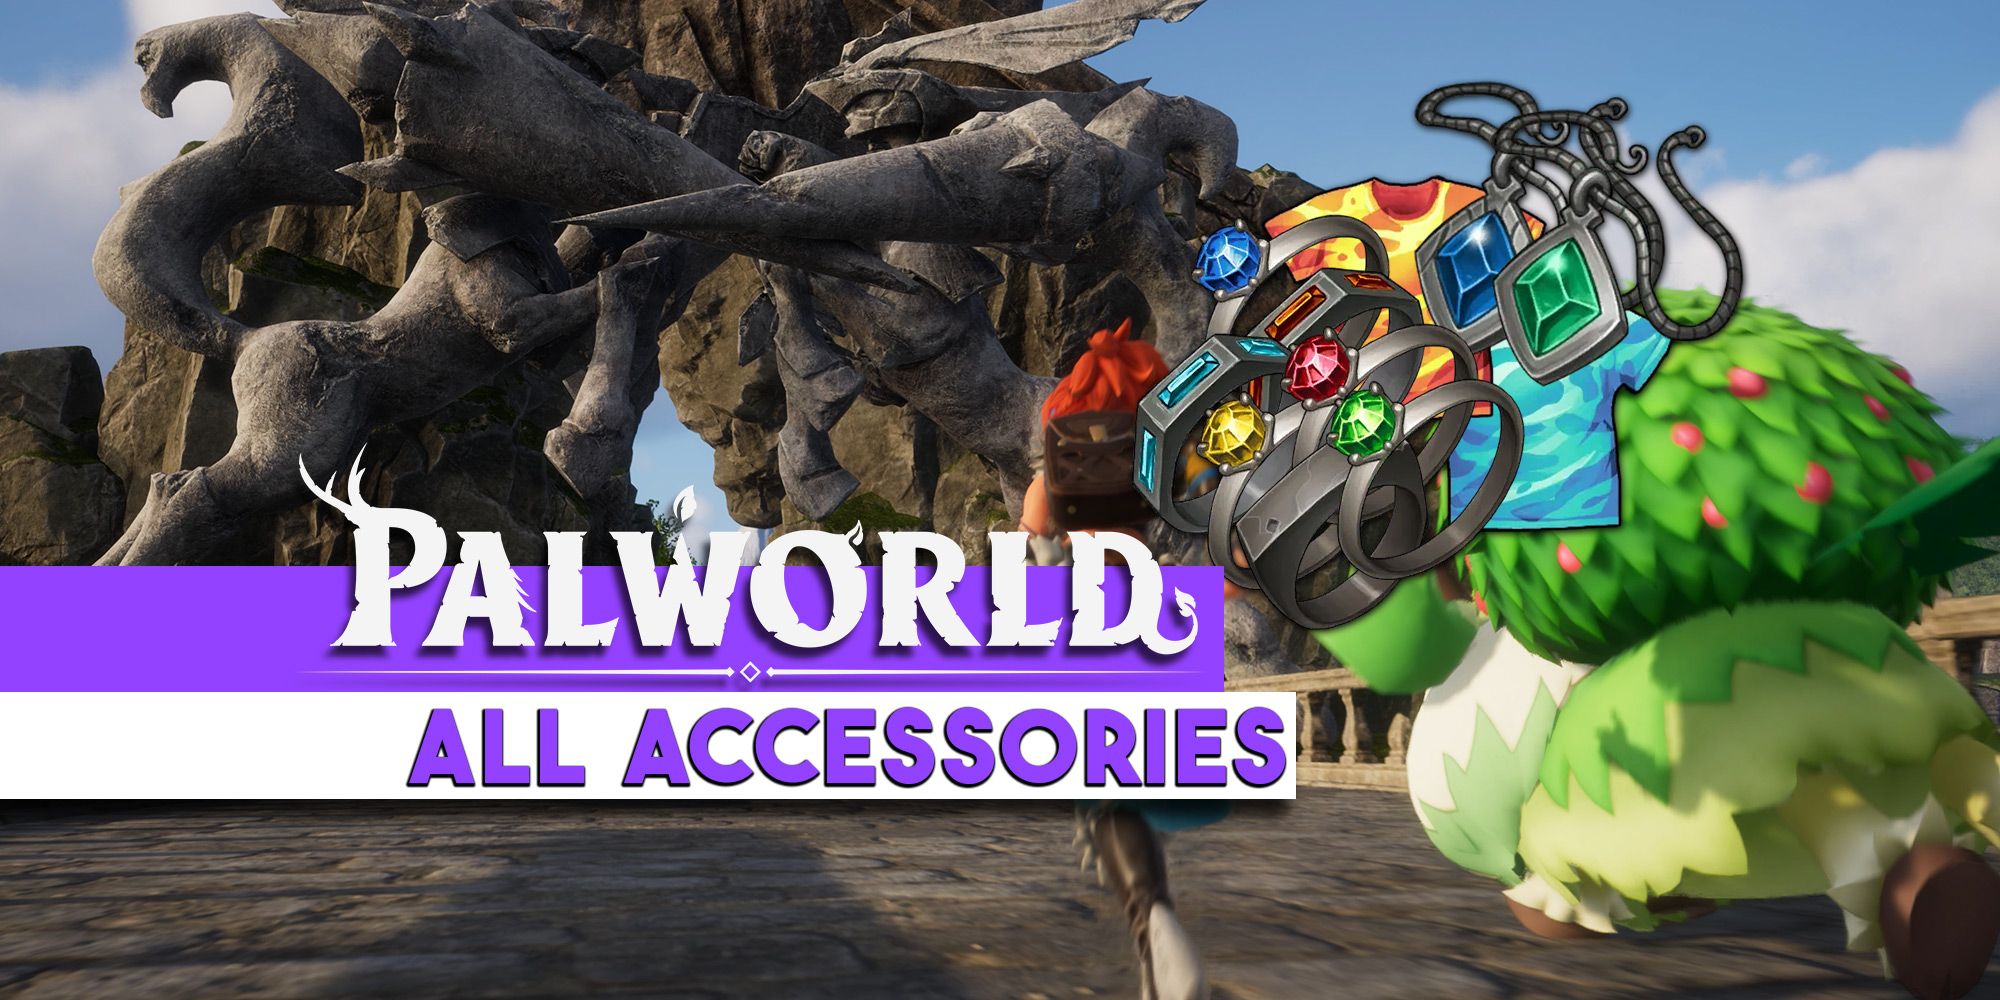 All Accessories in Palworld